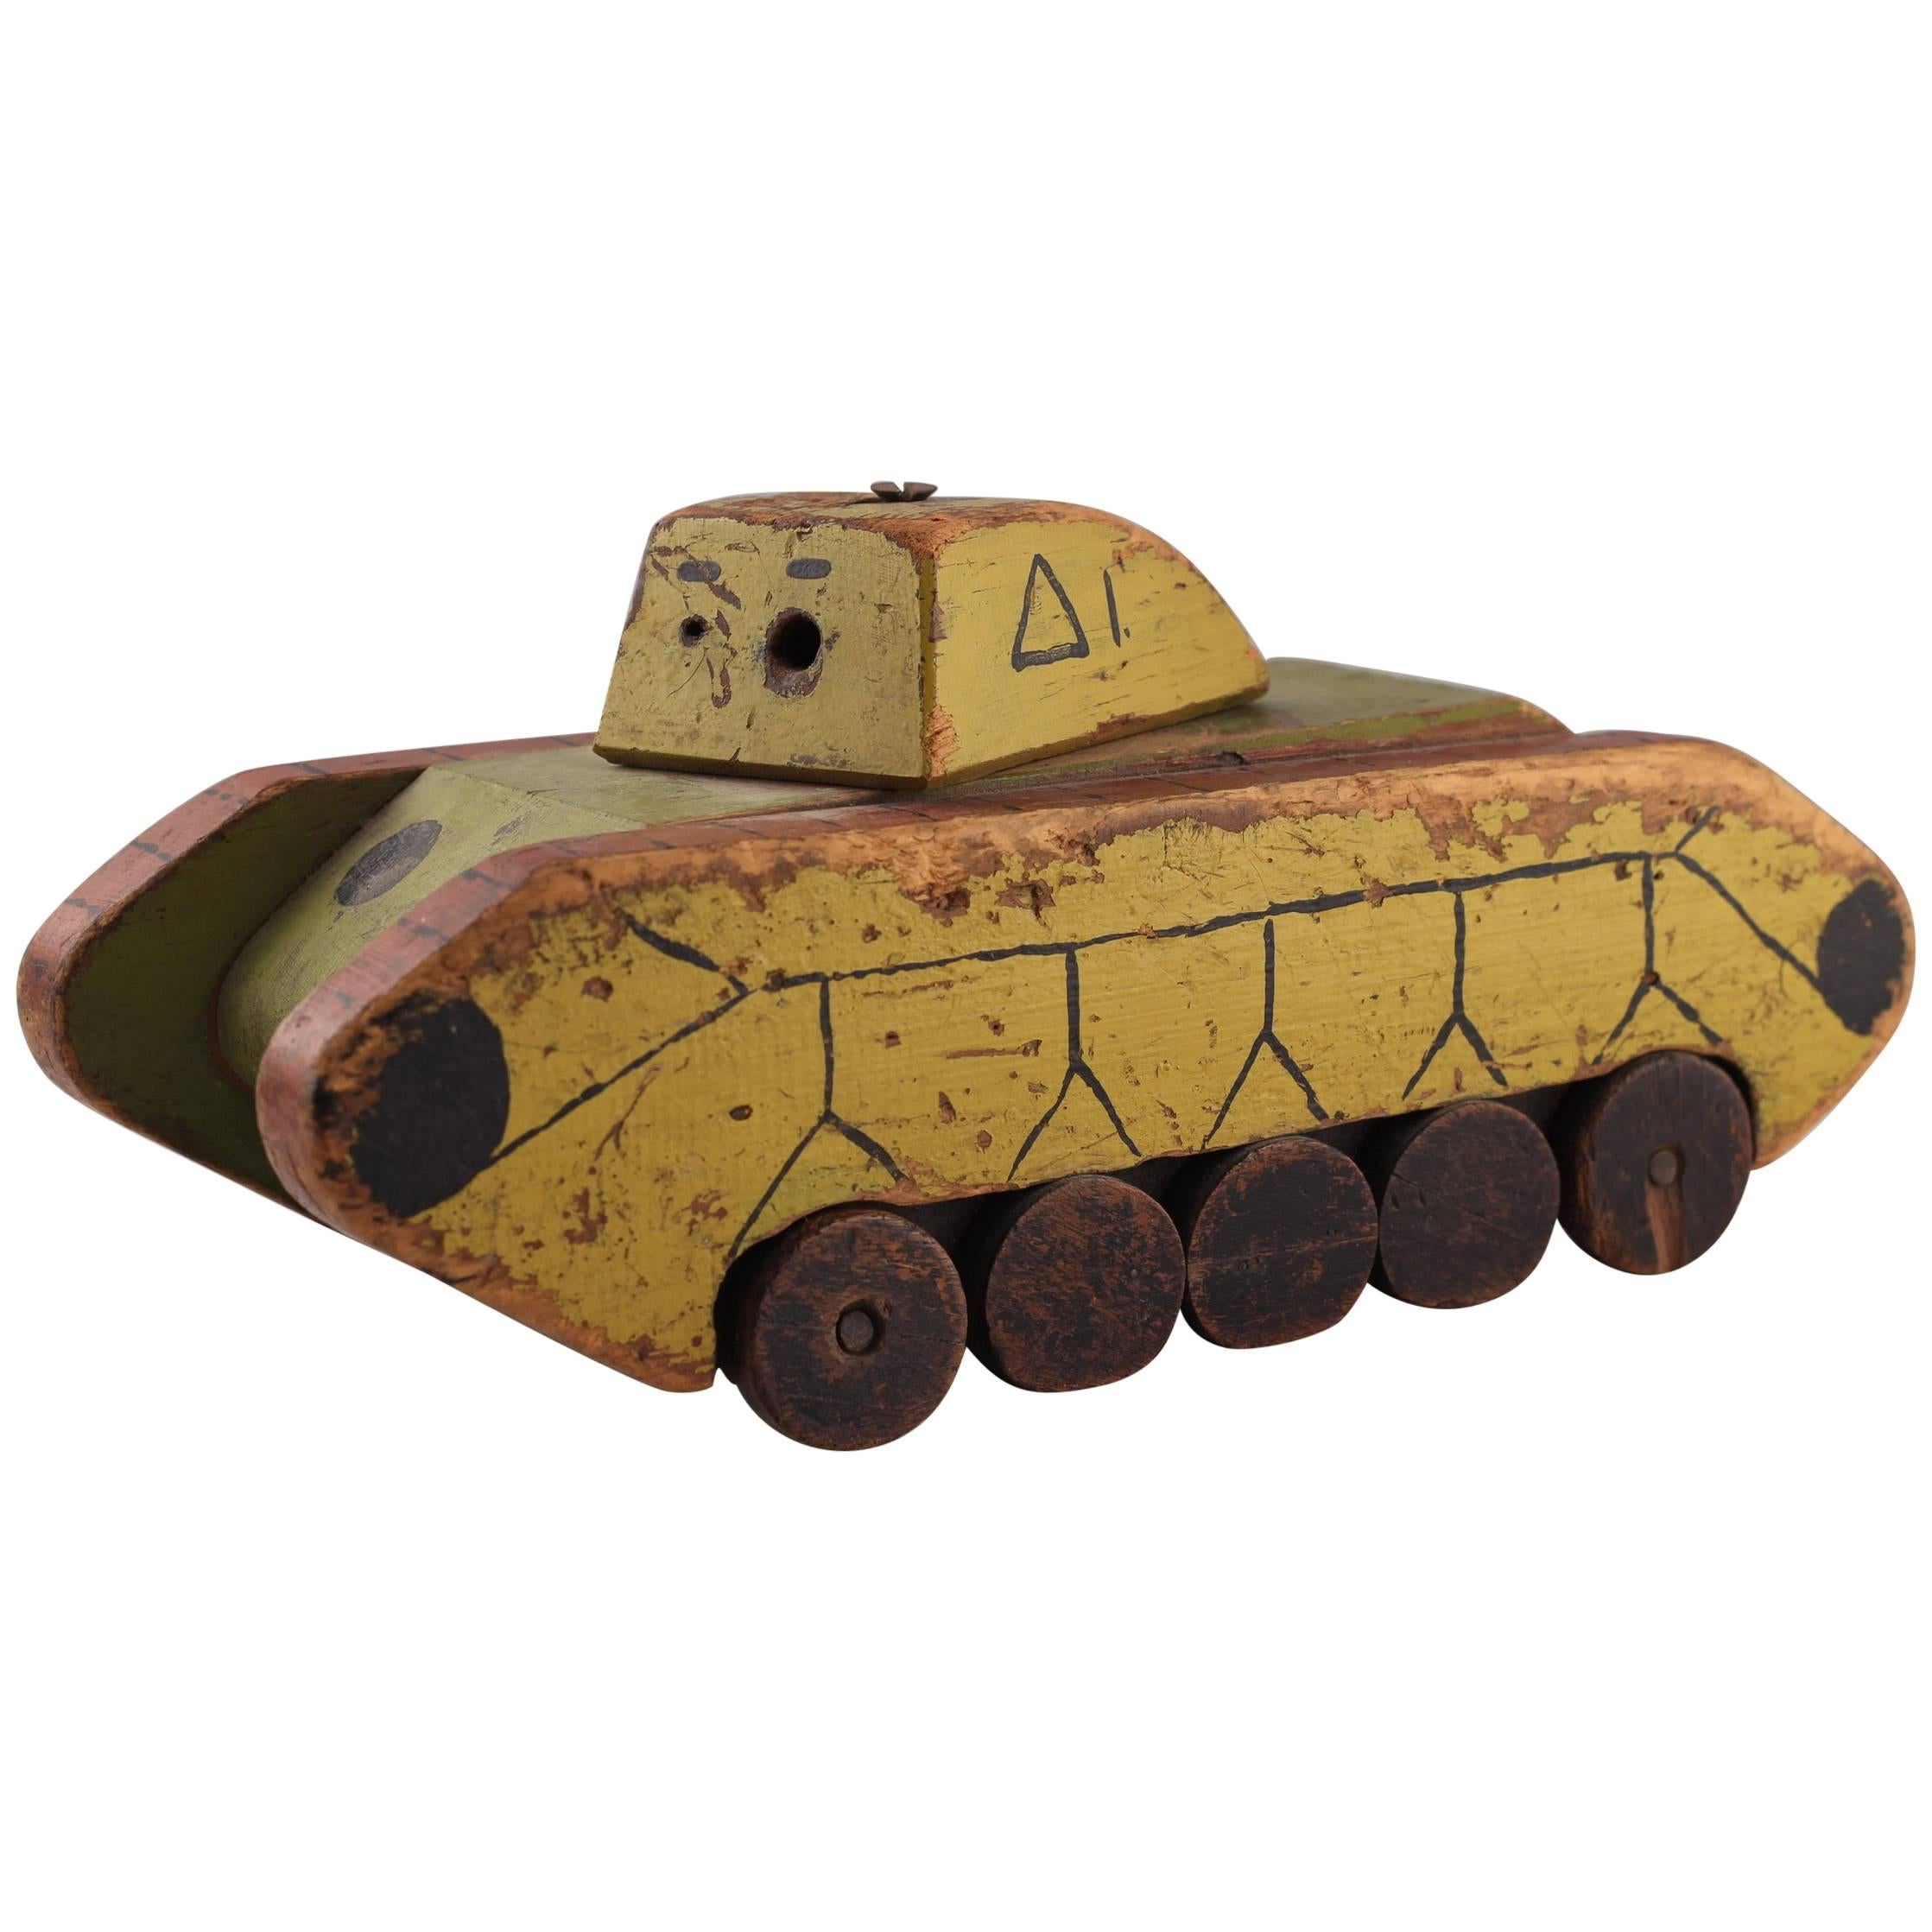 Toy Wooden Tank Made by Italian Soldier from the Second World War